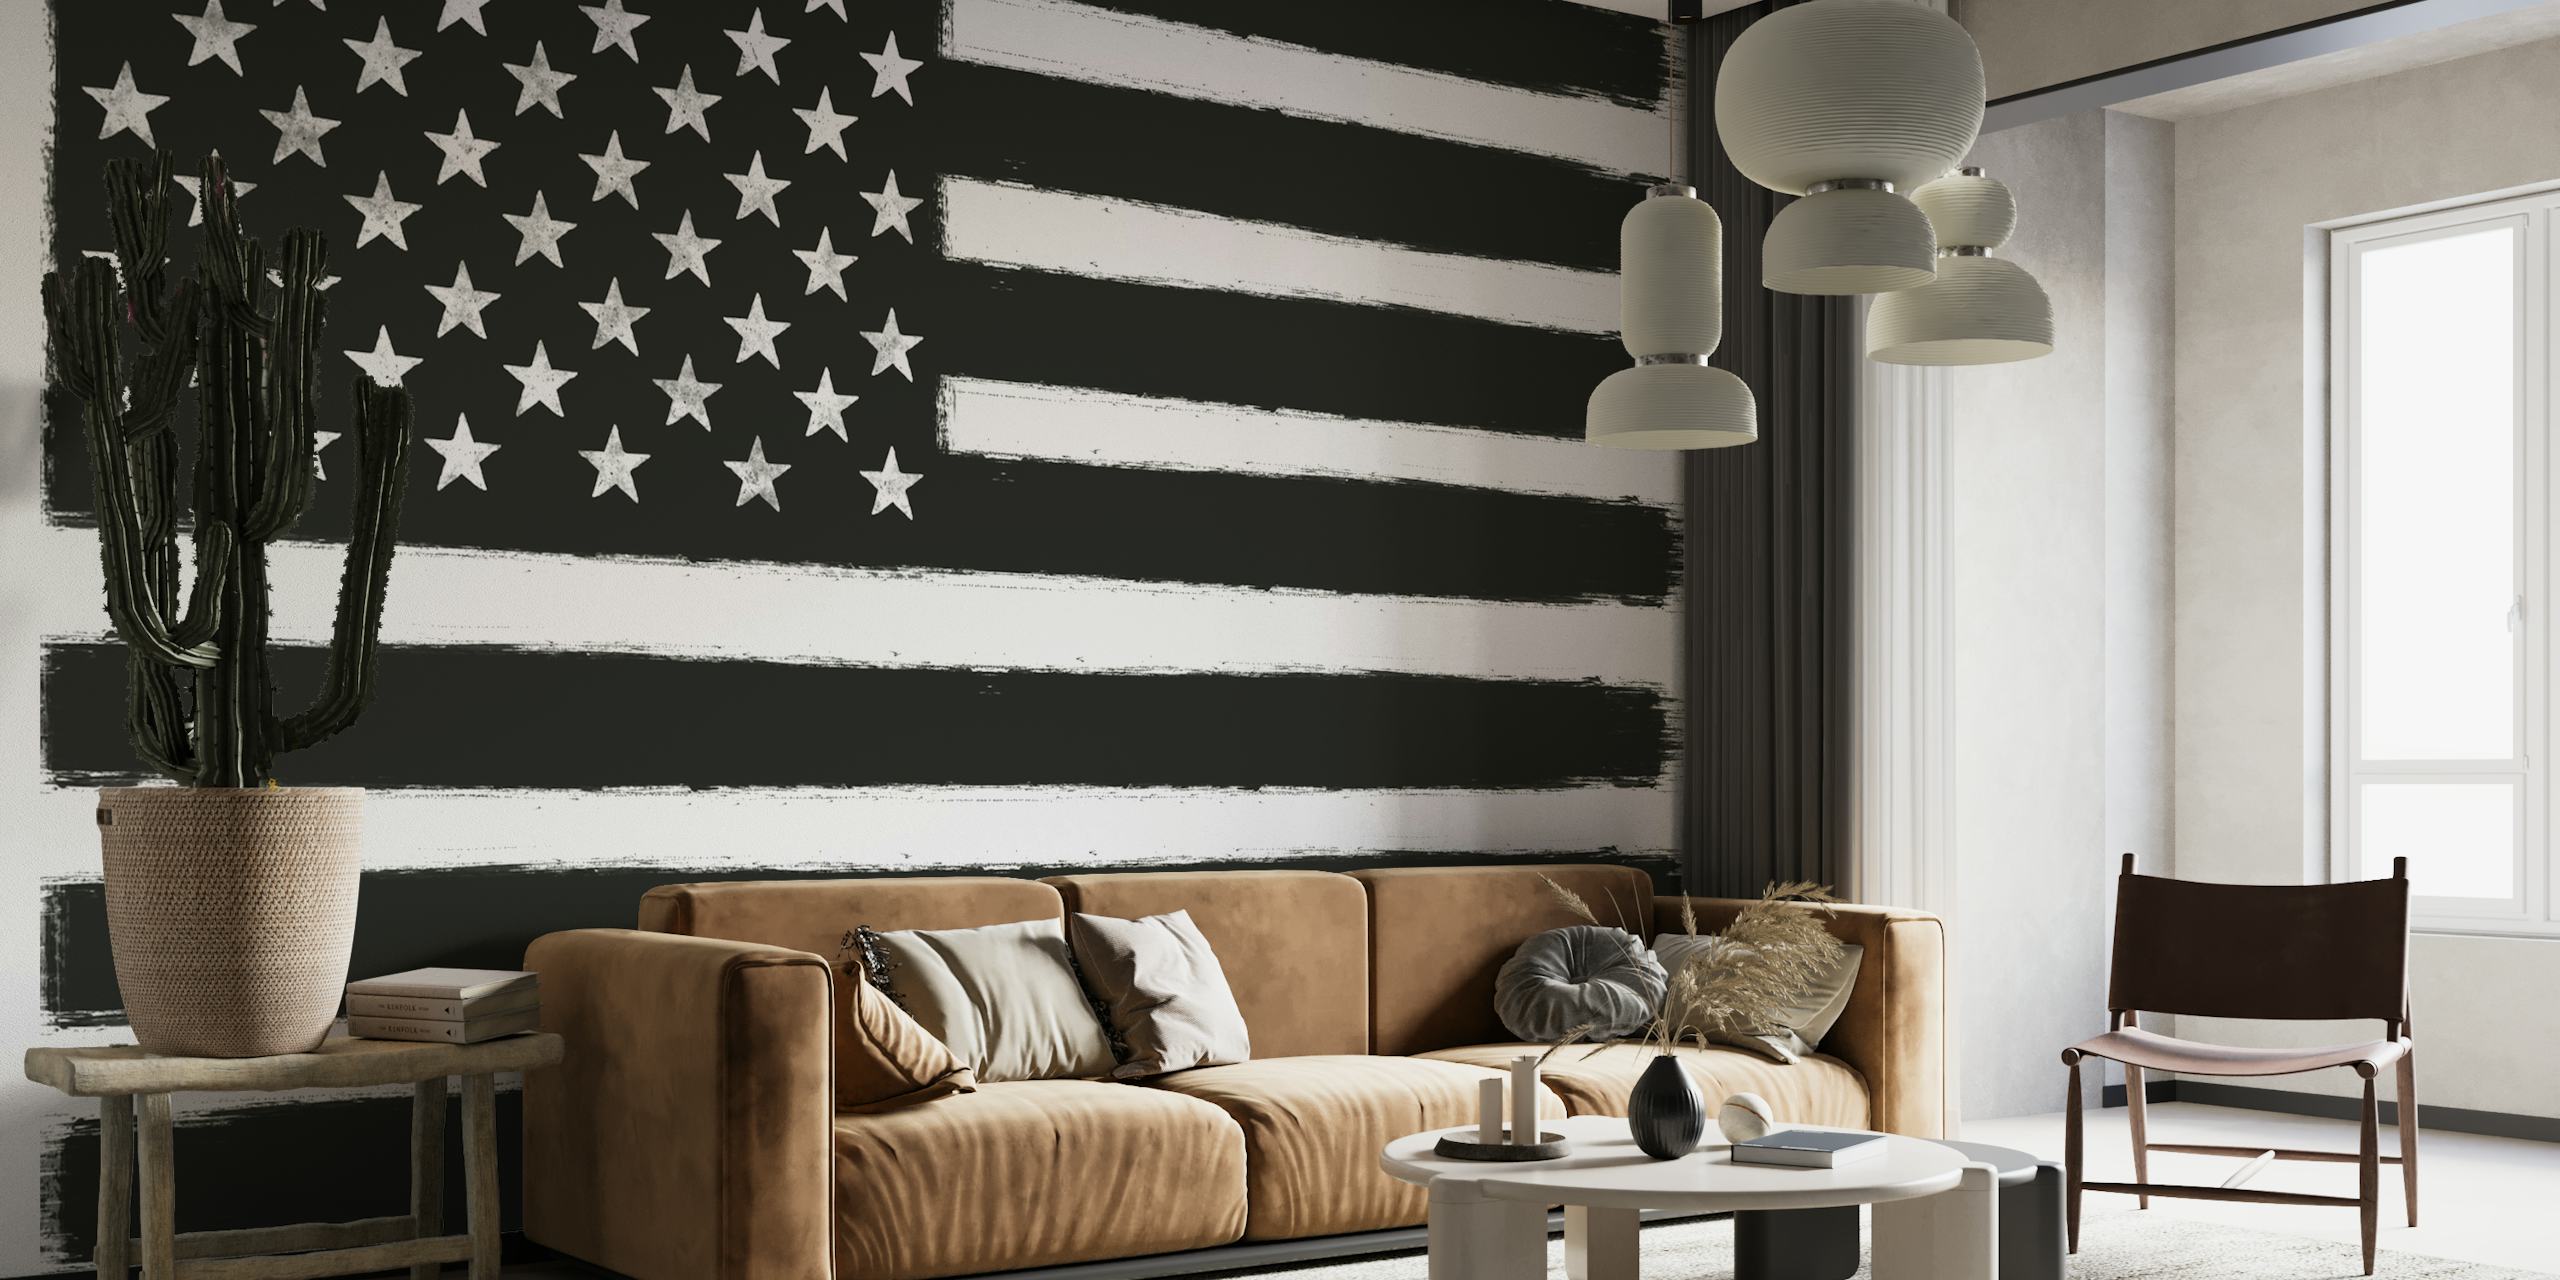 Black and white depiction of American flag wallpaper mural